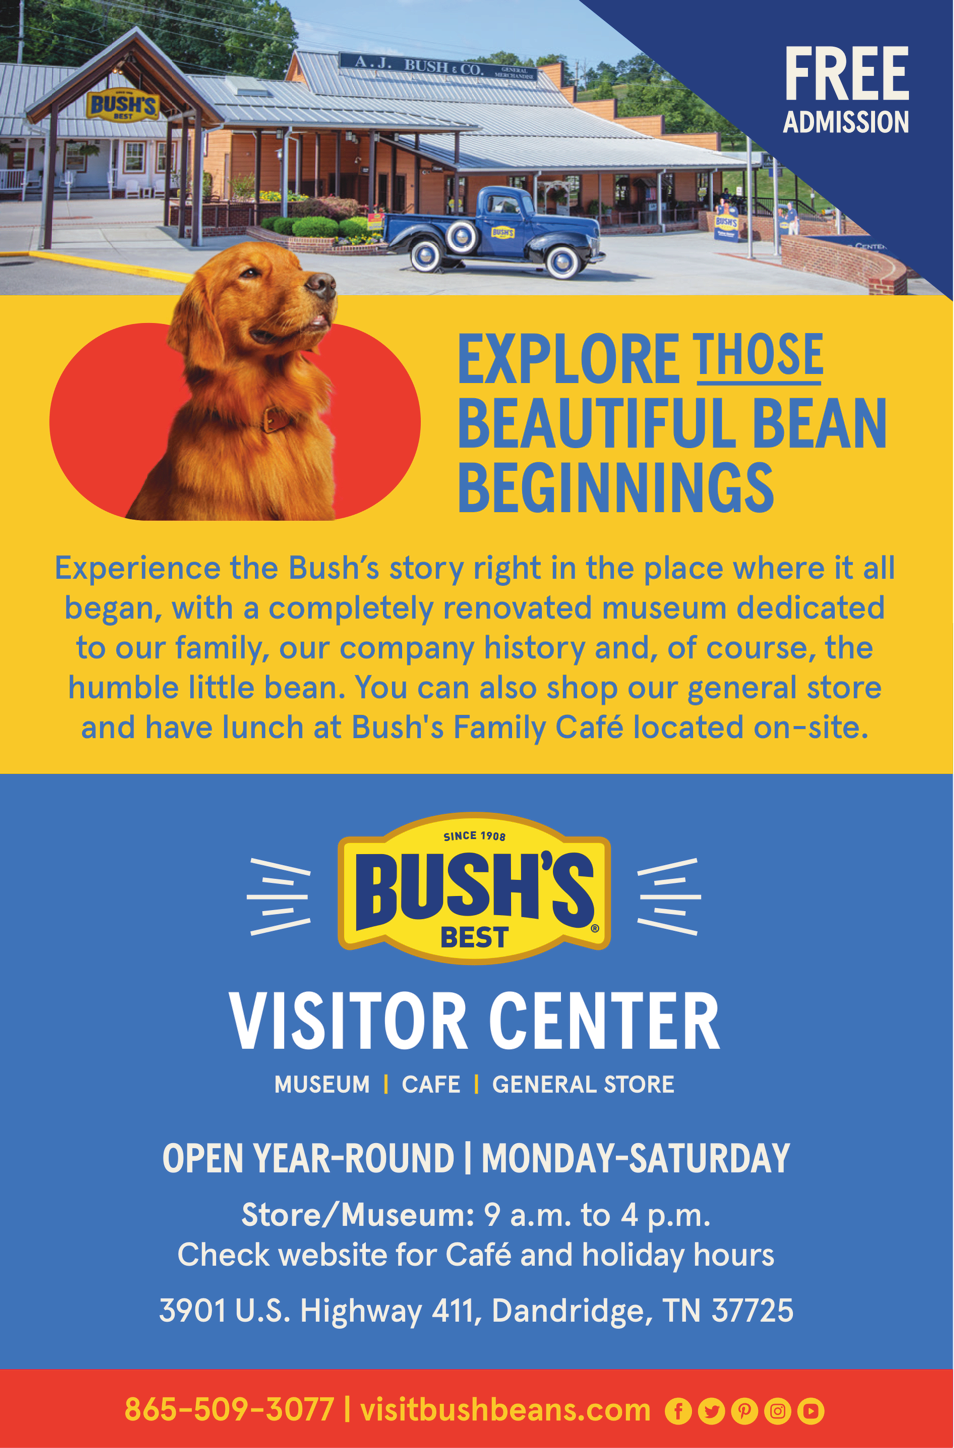 Bush's Visitor Center, Museum, Cafe & General Store Print Ad